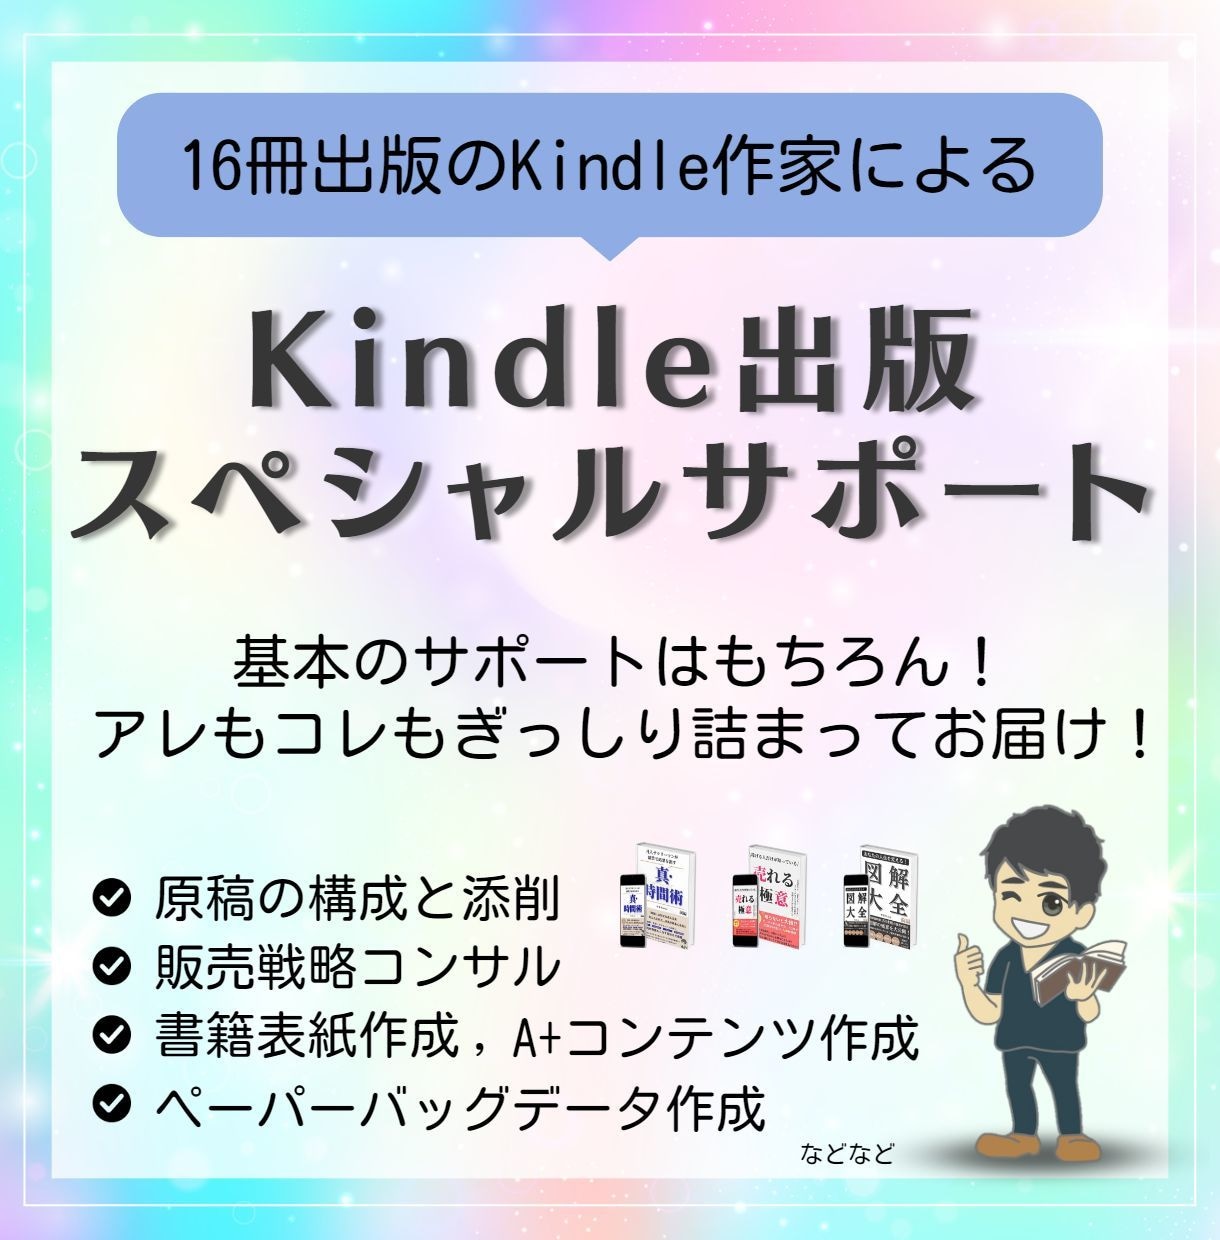 💬Coconara｜Special support for Kindle publishing Yama-chan (Kindle publishing supporter) 5.0…